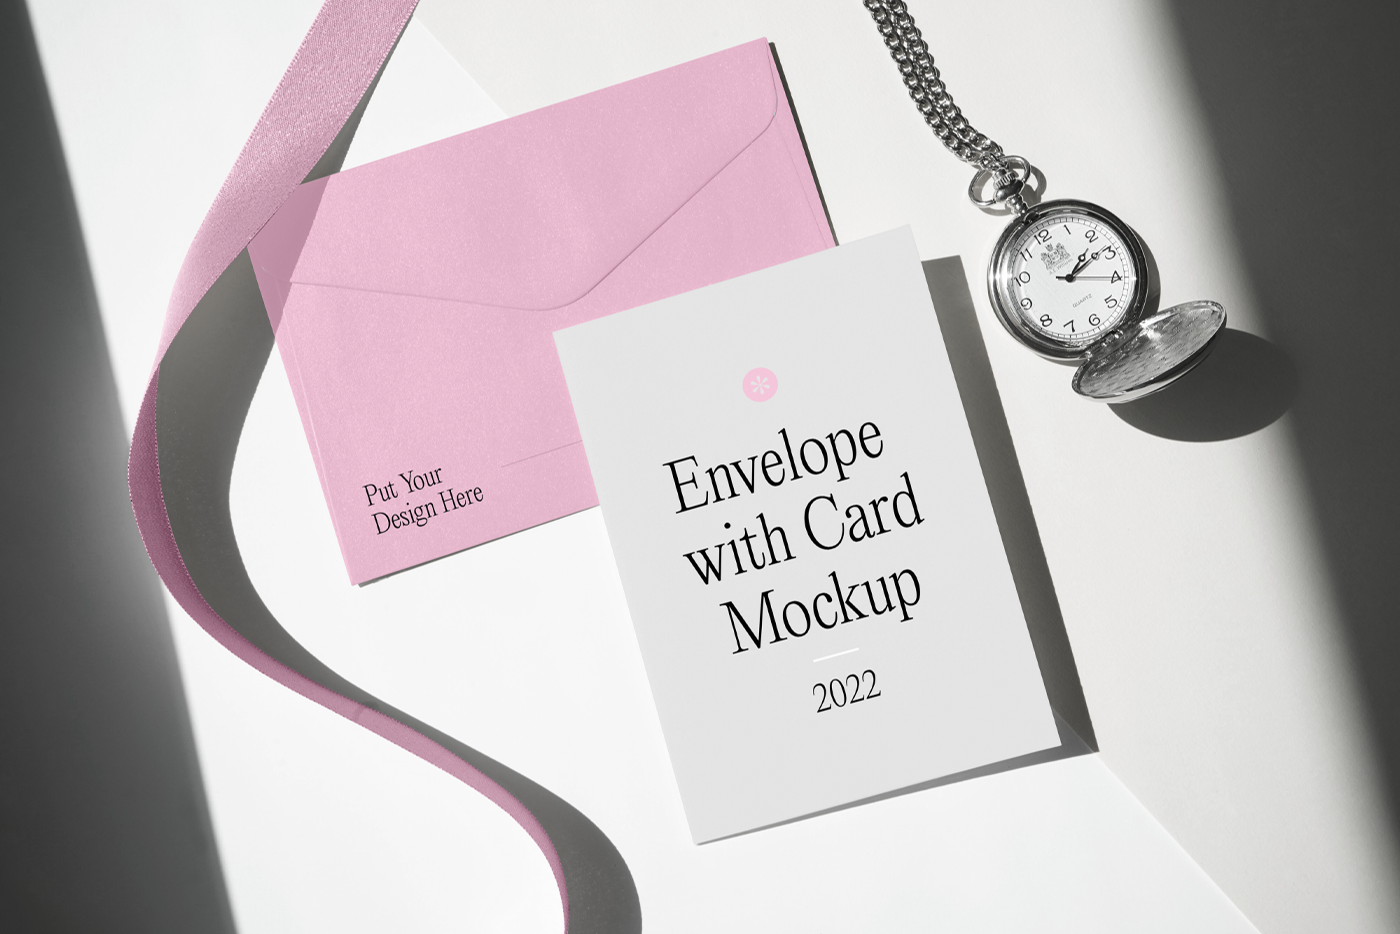 Free Envelope With Card Mockup